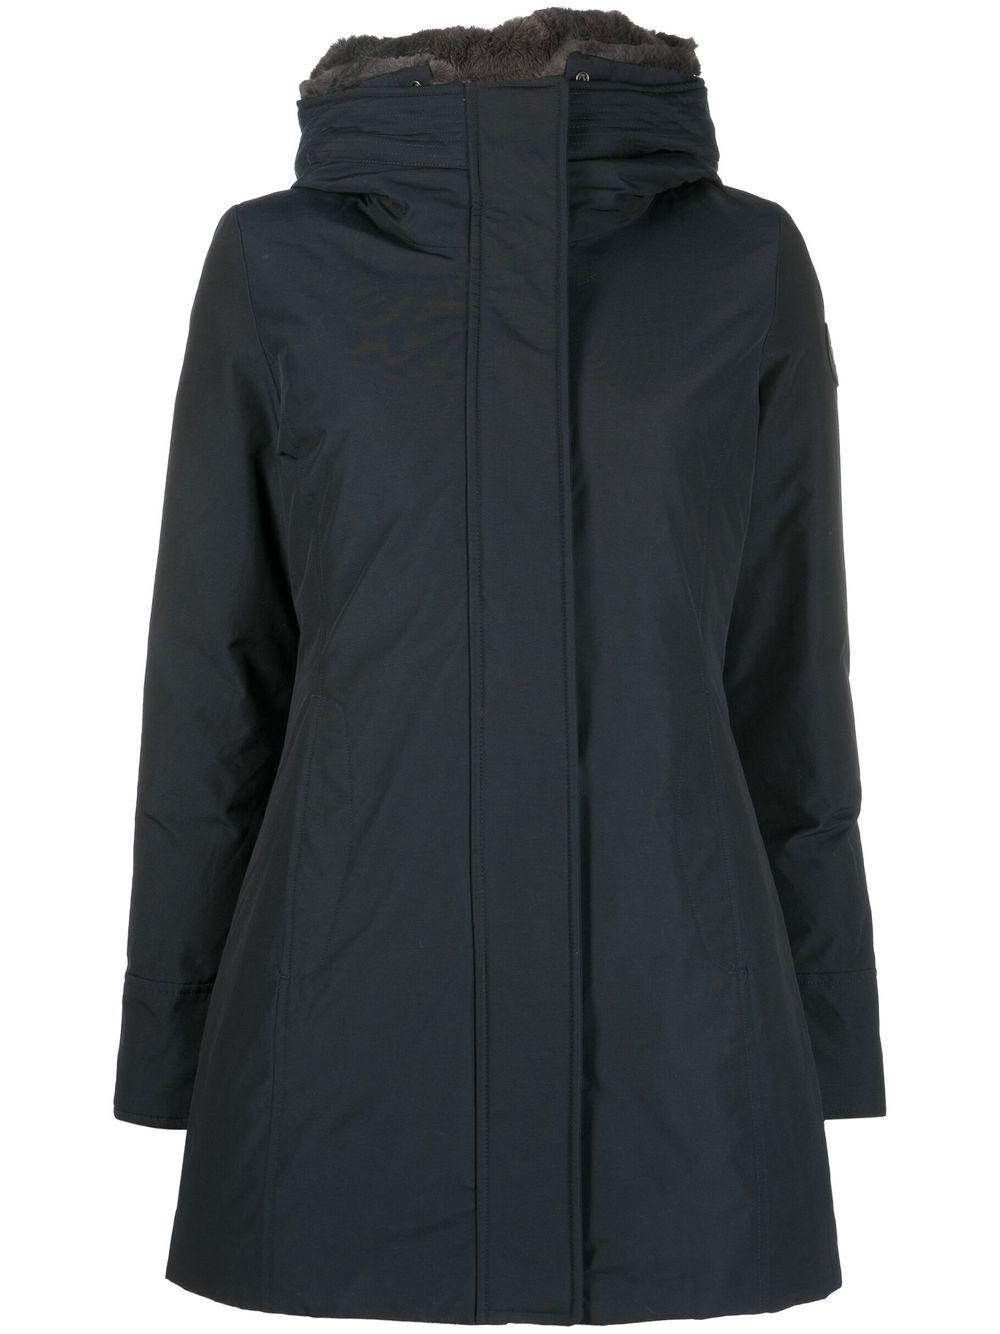 Woolrich Synthetic Luxury Arctic Coat in Blue,Black - Save 48% Blue Womens Clothing Coats Short coats 